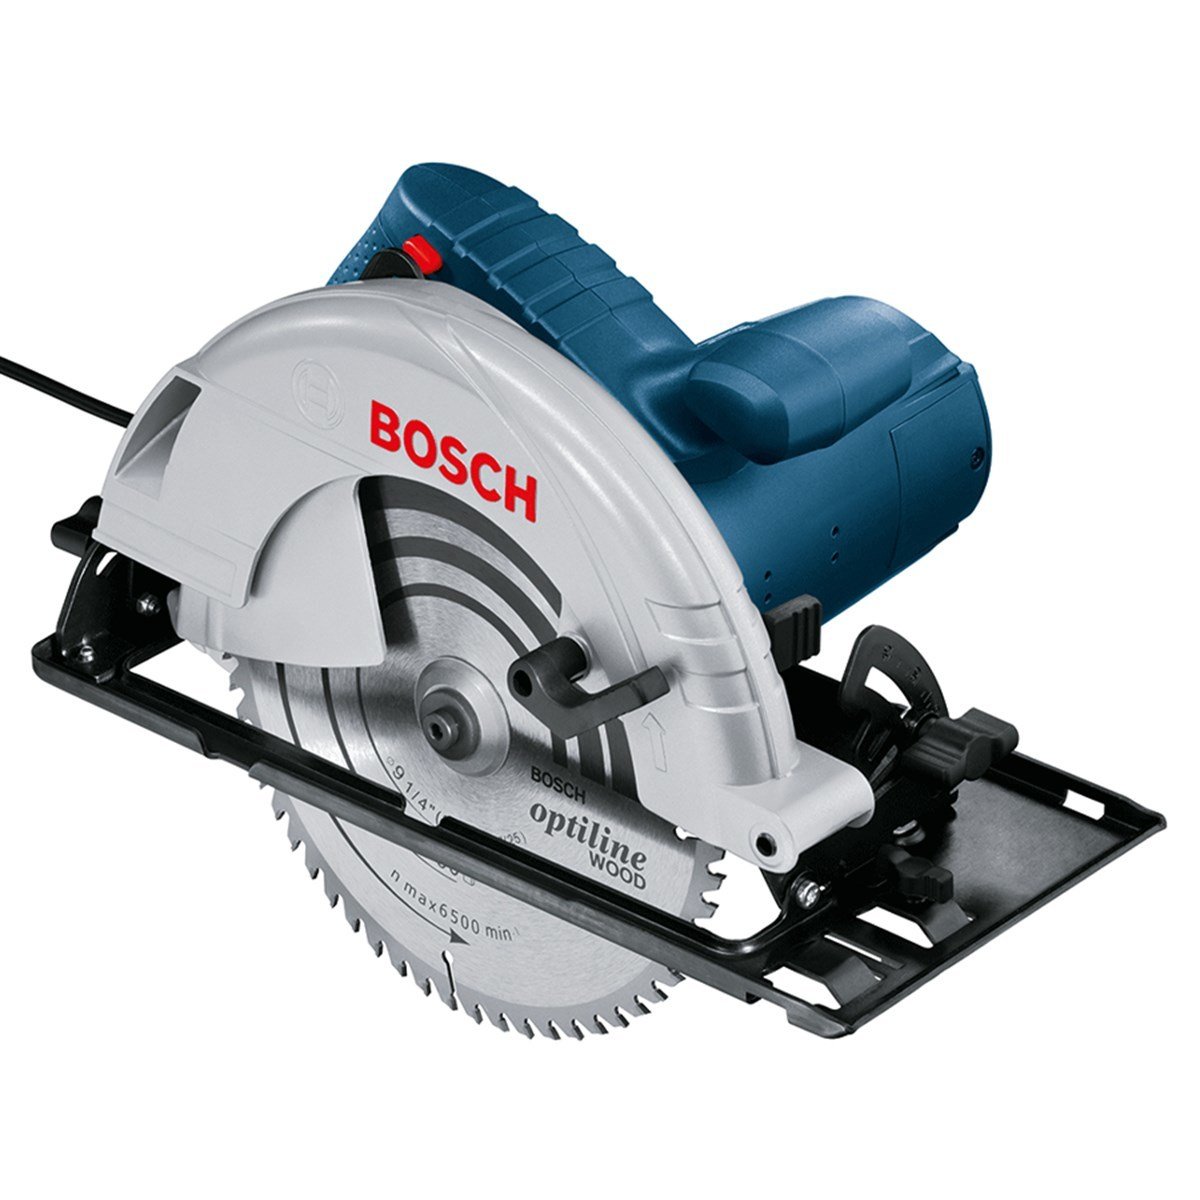 Bosch GKS 235 Turbo Daire Testere Makinesi (06015A2001)